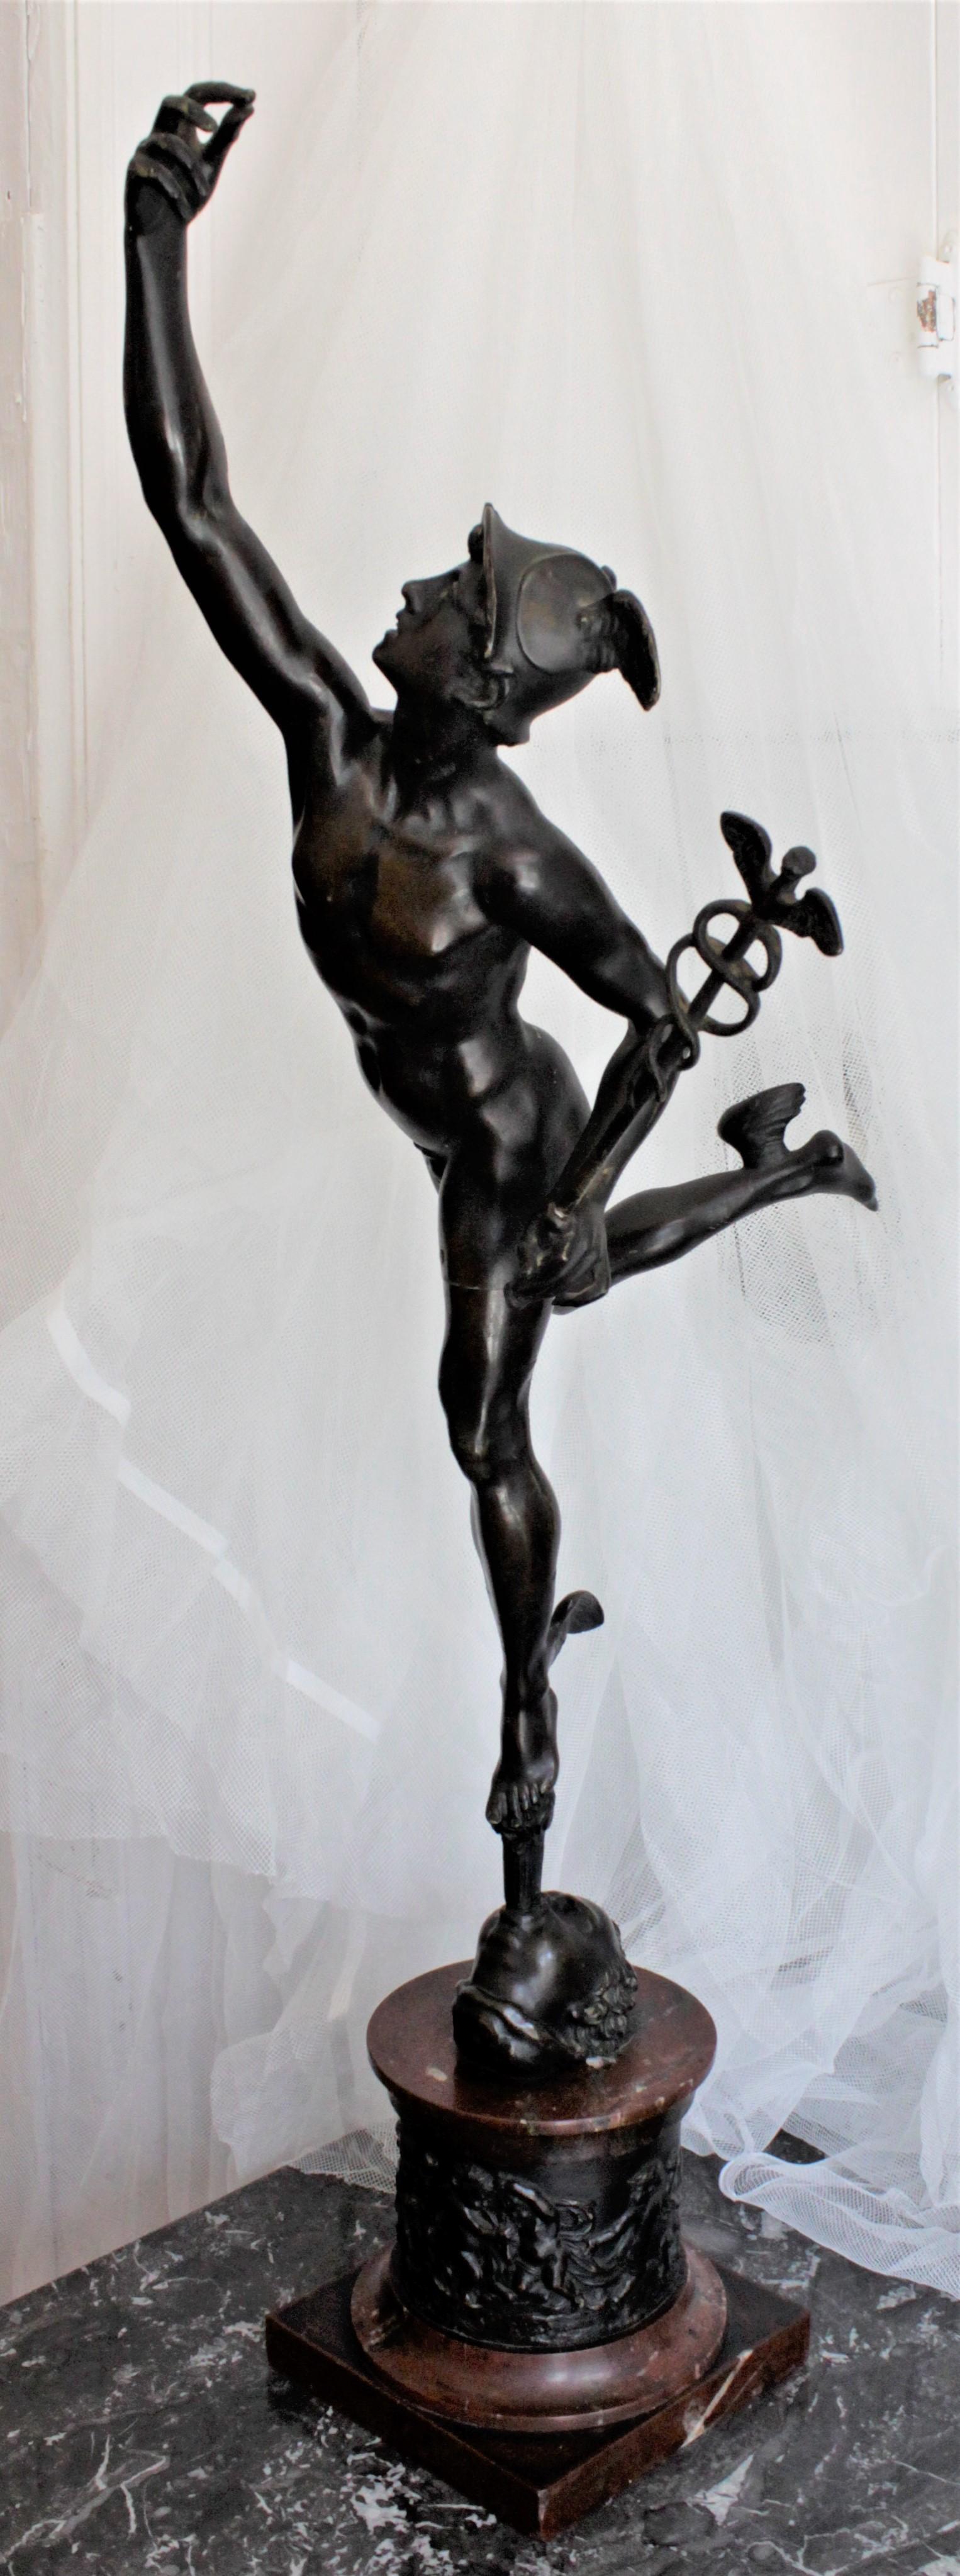 This cast and patinated bronze sculpture of either the mythological god mercury or Hermès is unsigned, but presumed to have been made in France in approximately 1850 in the Classical style. The winged male figure is holding a caduceus and standing